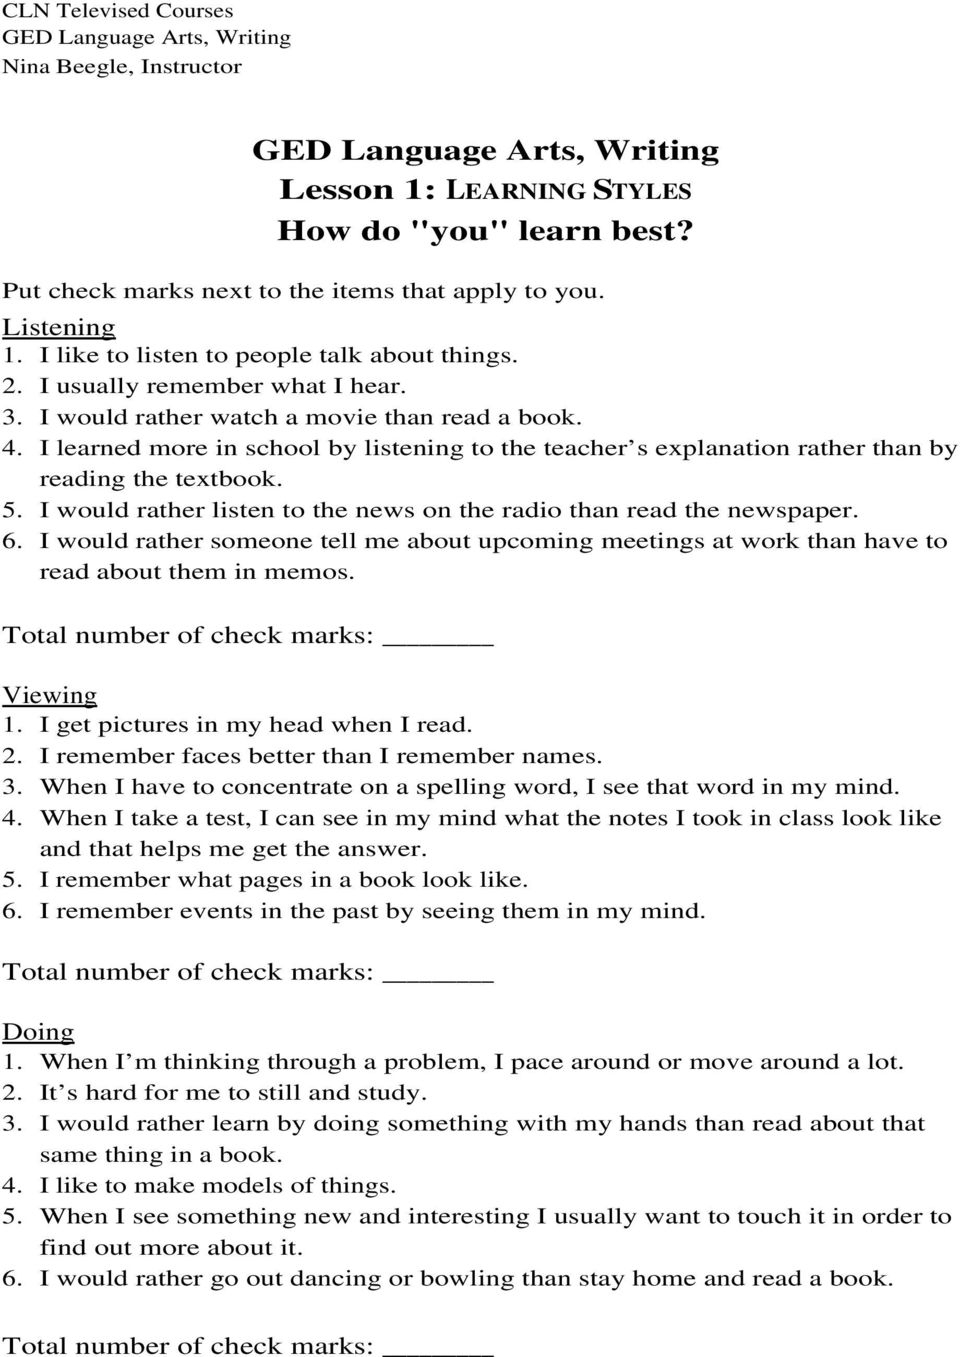 Ged Language Arts, Writing Lesson 1: Noun Overview Worksheet